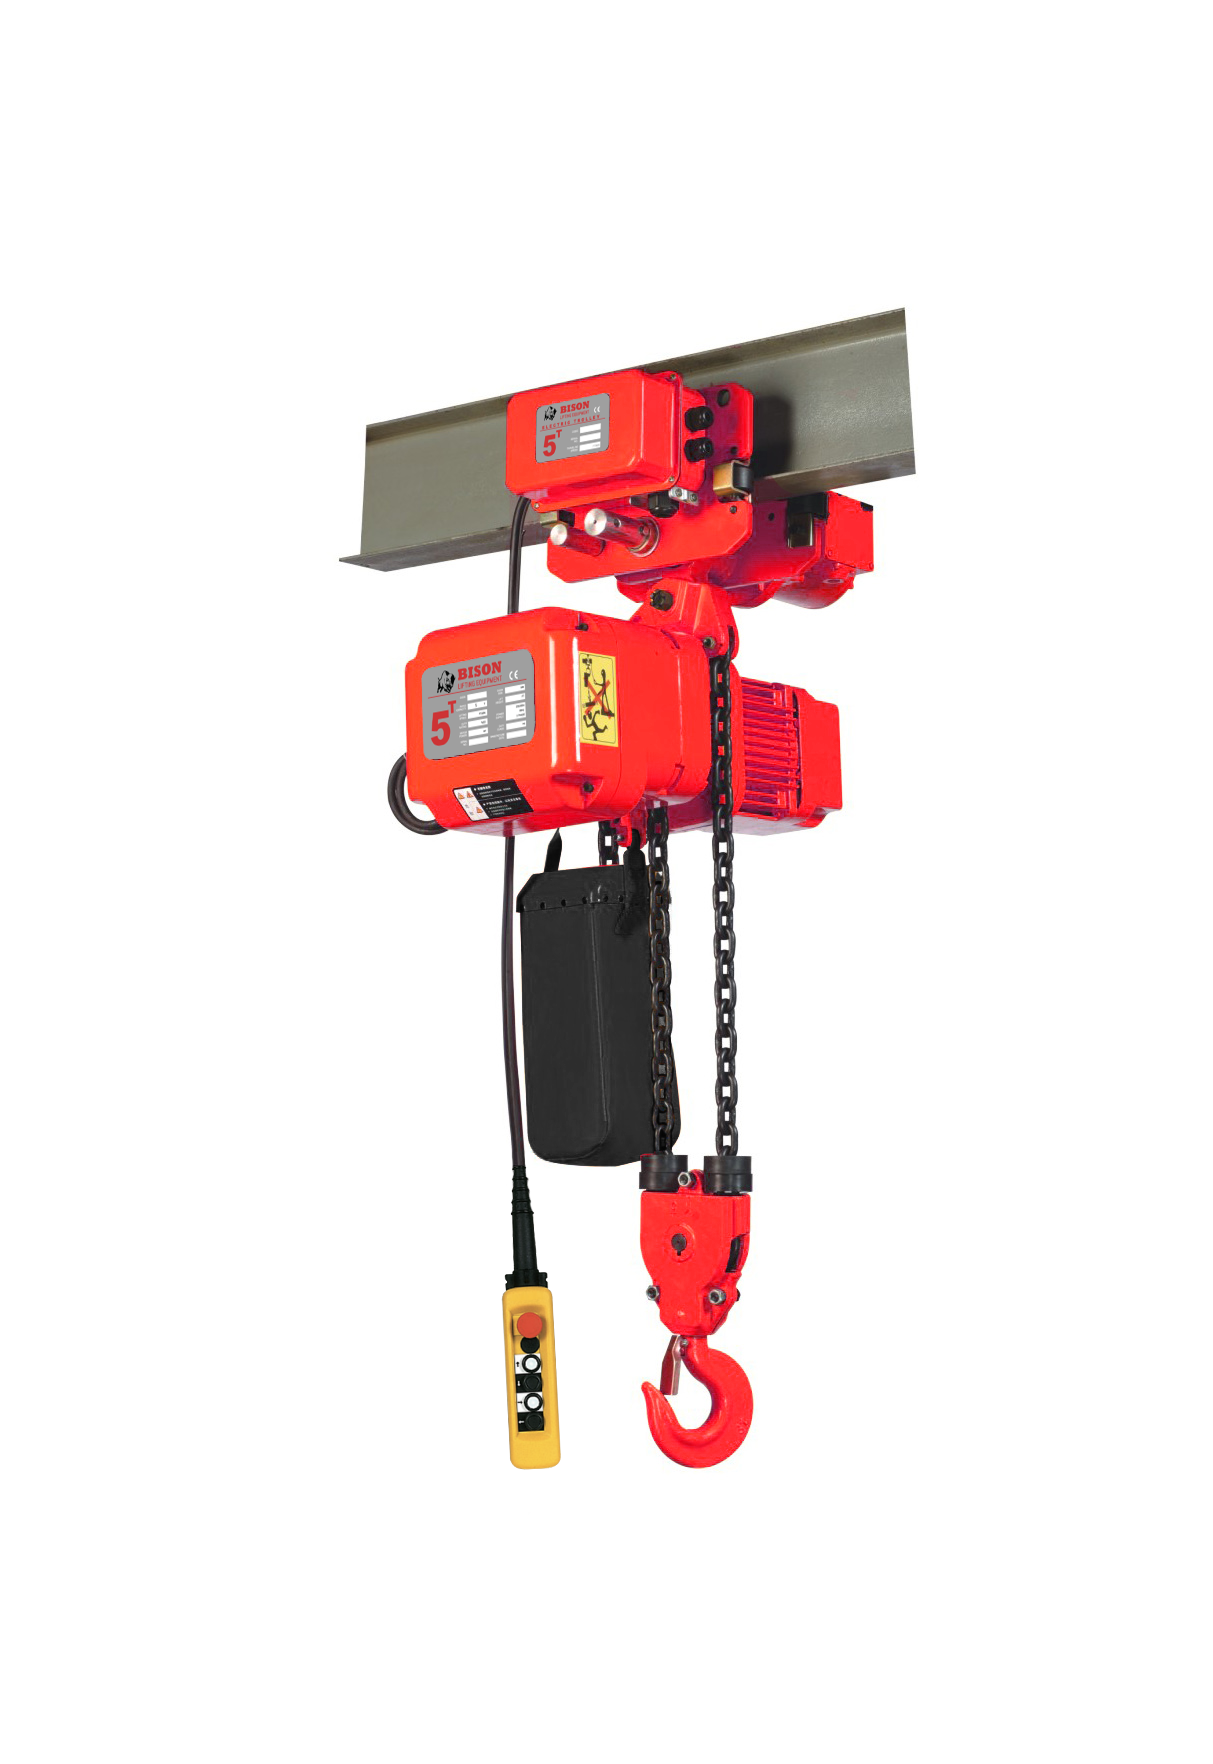 Bison Lifting HHBD05SK-02-WPC05 5 Ton 3 Phase Single Speed Electric Chain Hoist with Trolley - 20ft of Lift 3-Ph 230V/460V HHBD05SK-02-WPC05